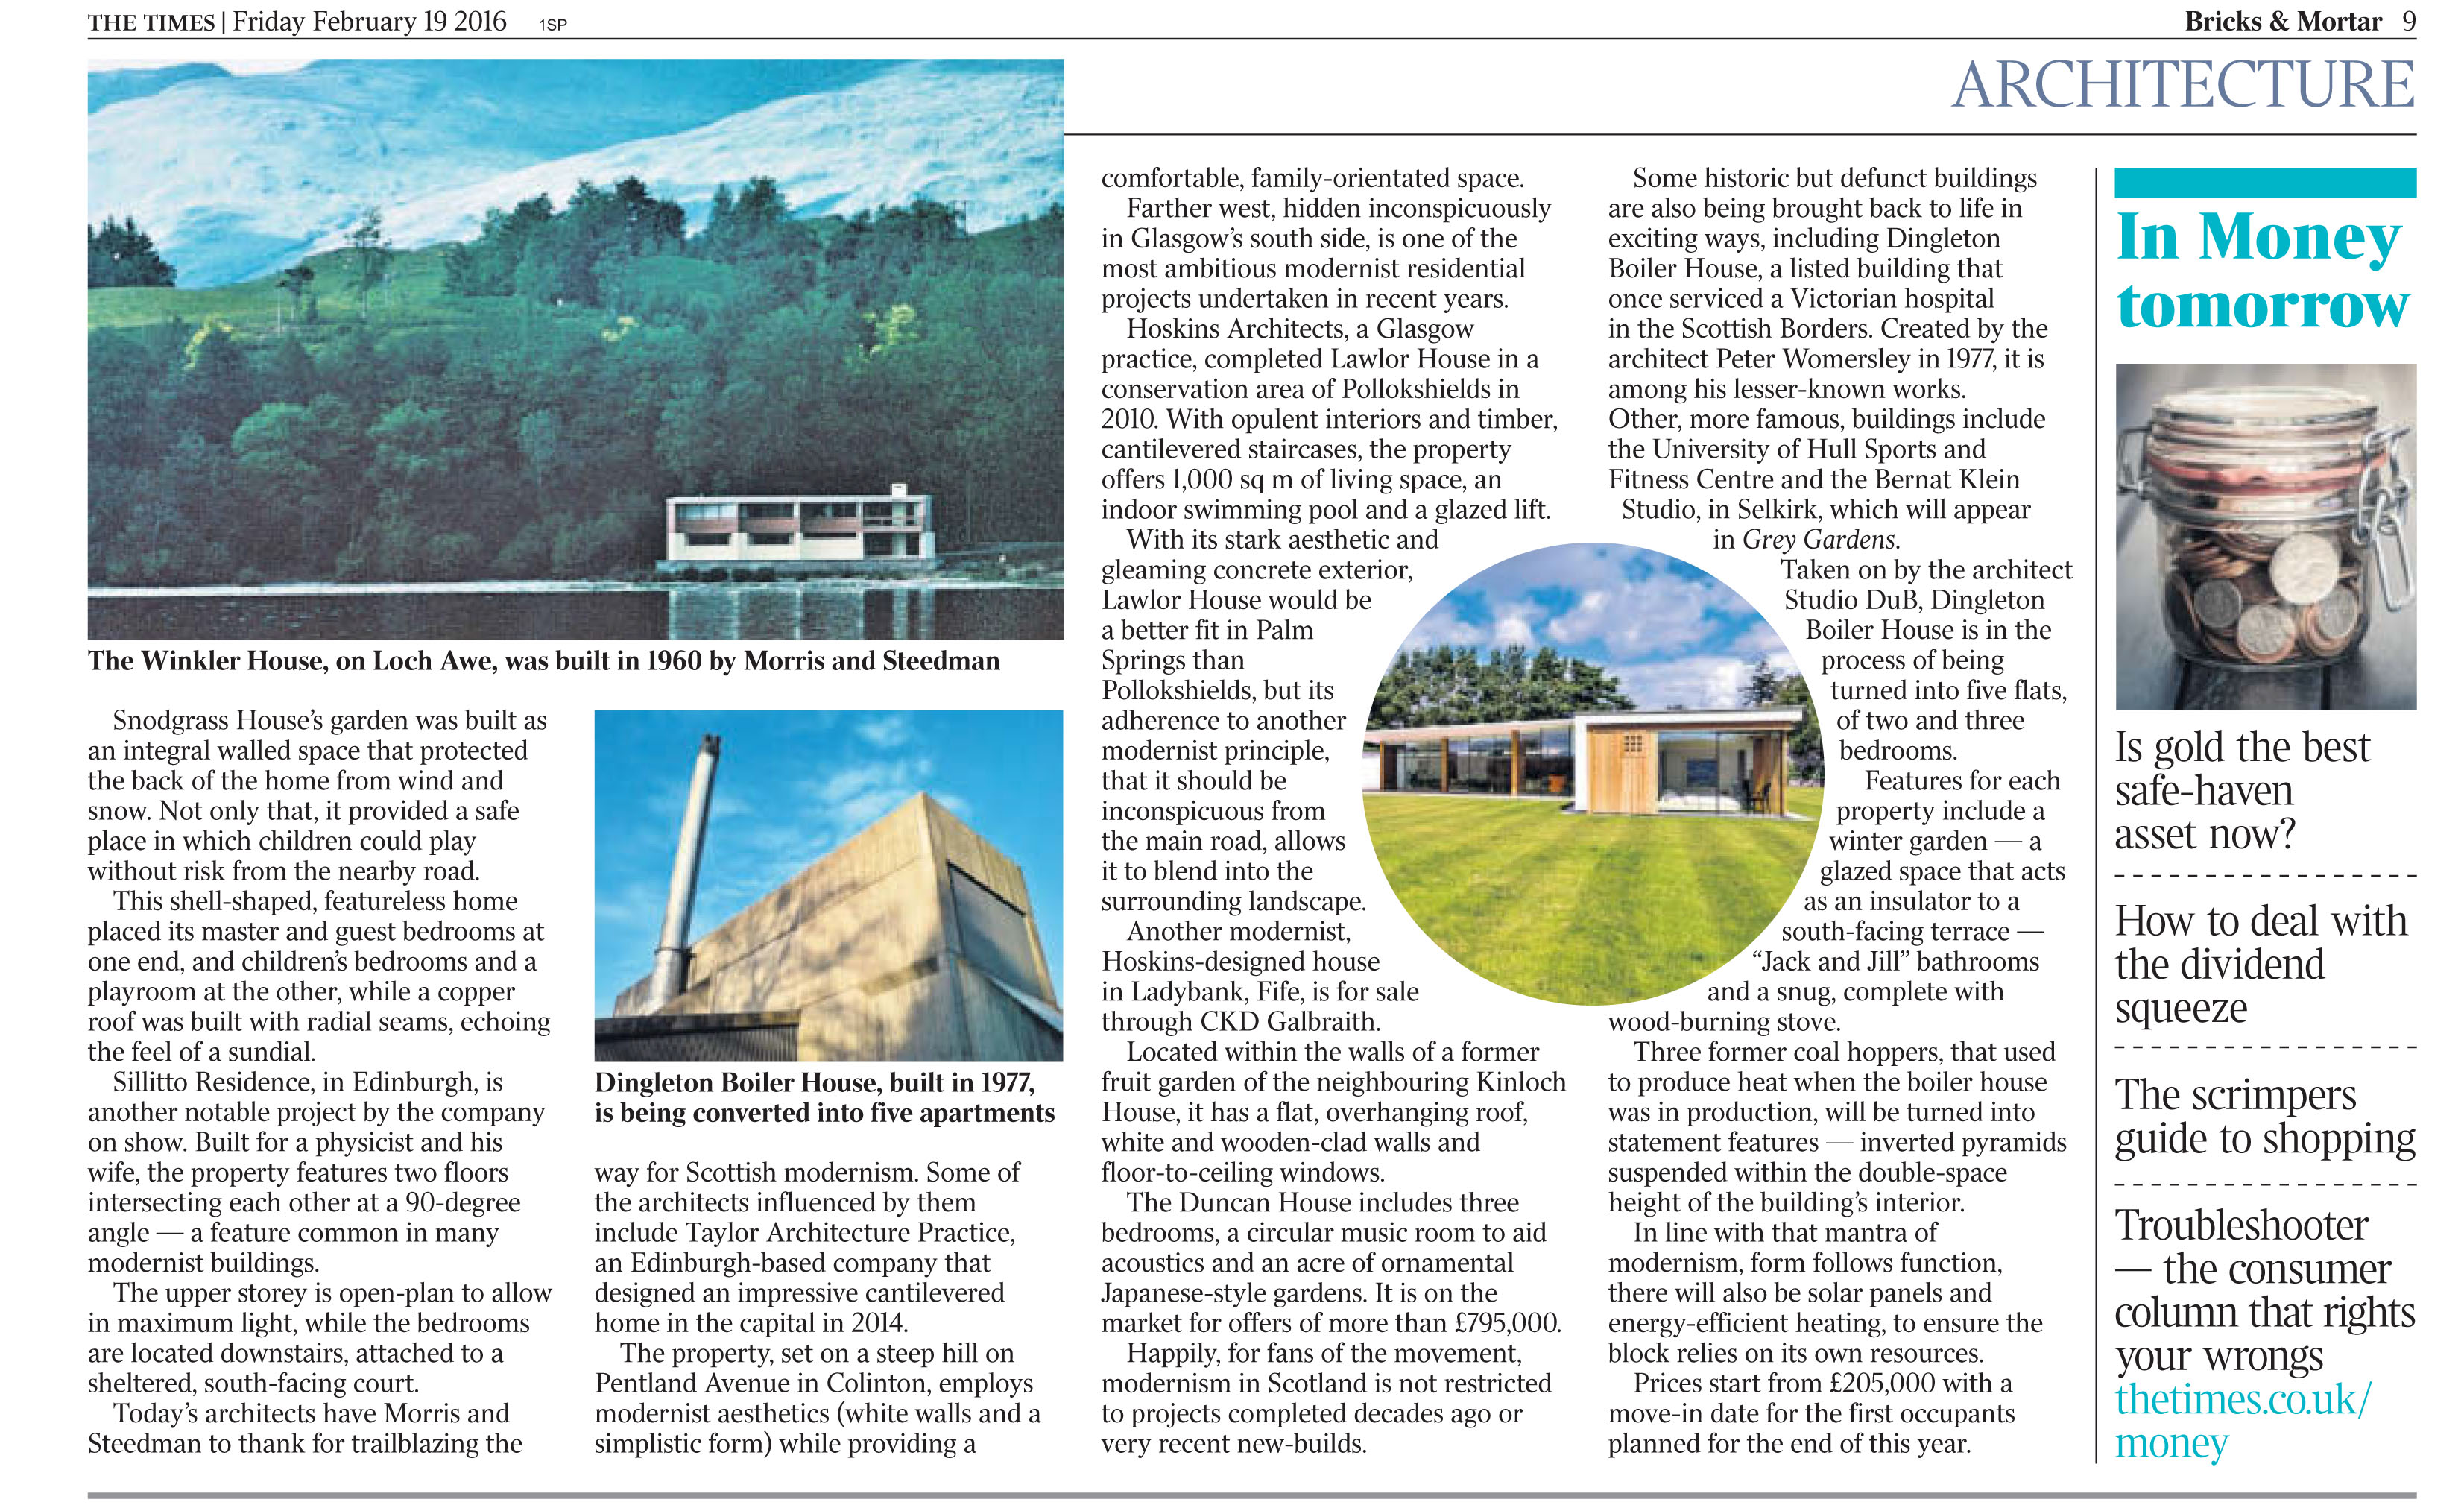 The Times features the Boiler House Project